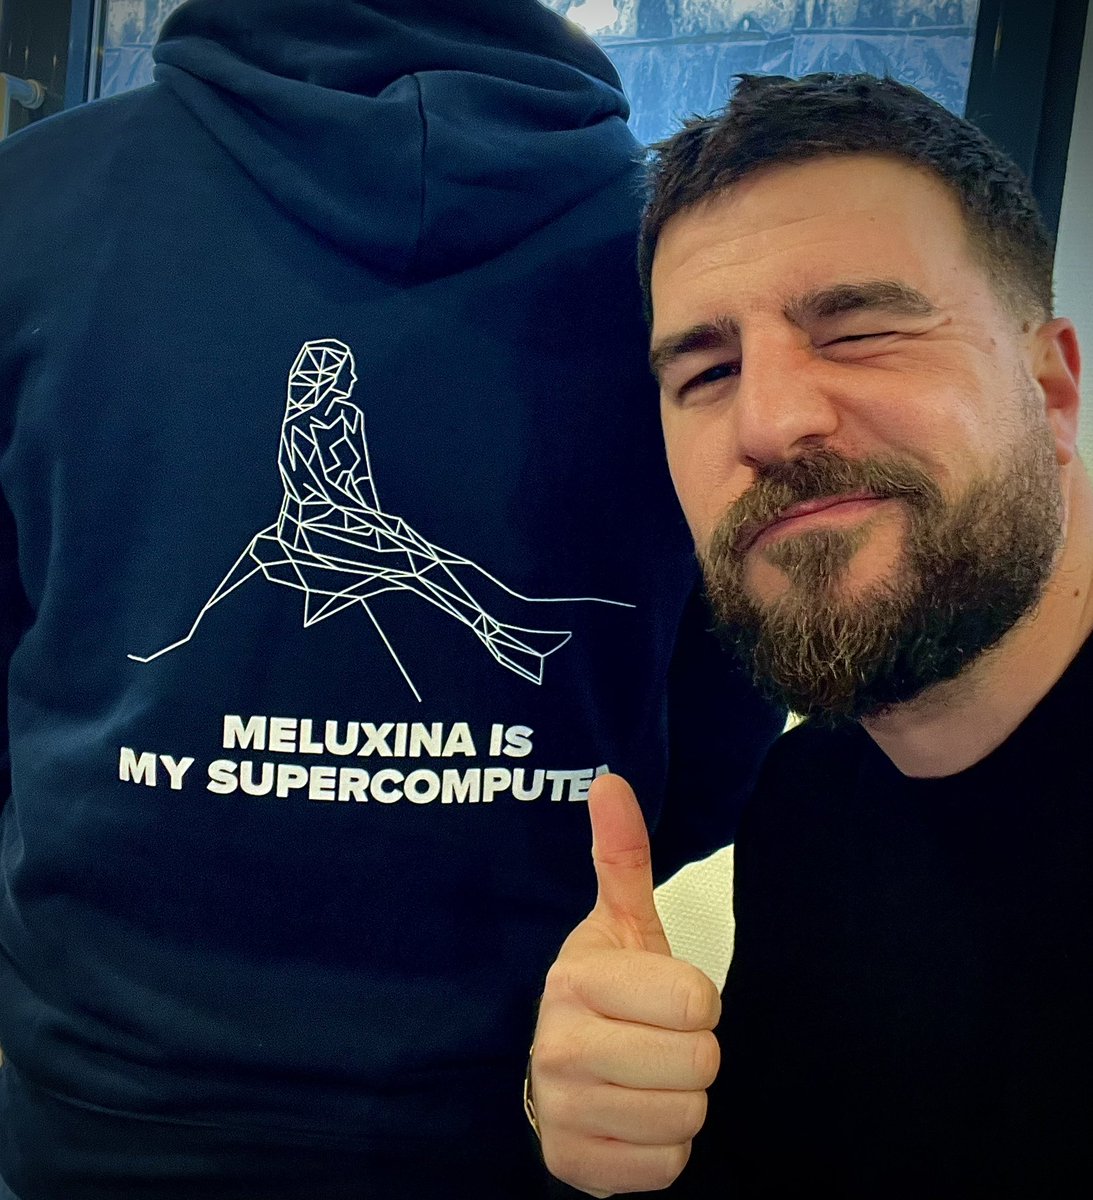 Excited at @luxprovide to democratize supercomputing with #MeluXina! 🚀 'MeluXina is my Supercomputer' is more than a slogan—it's our mission to break down barriers and prepare for the next tech revolution. Let's make supercomputing accessible to all! #Innovation